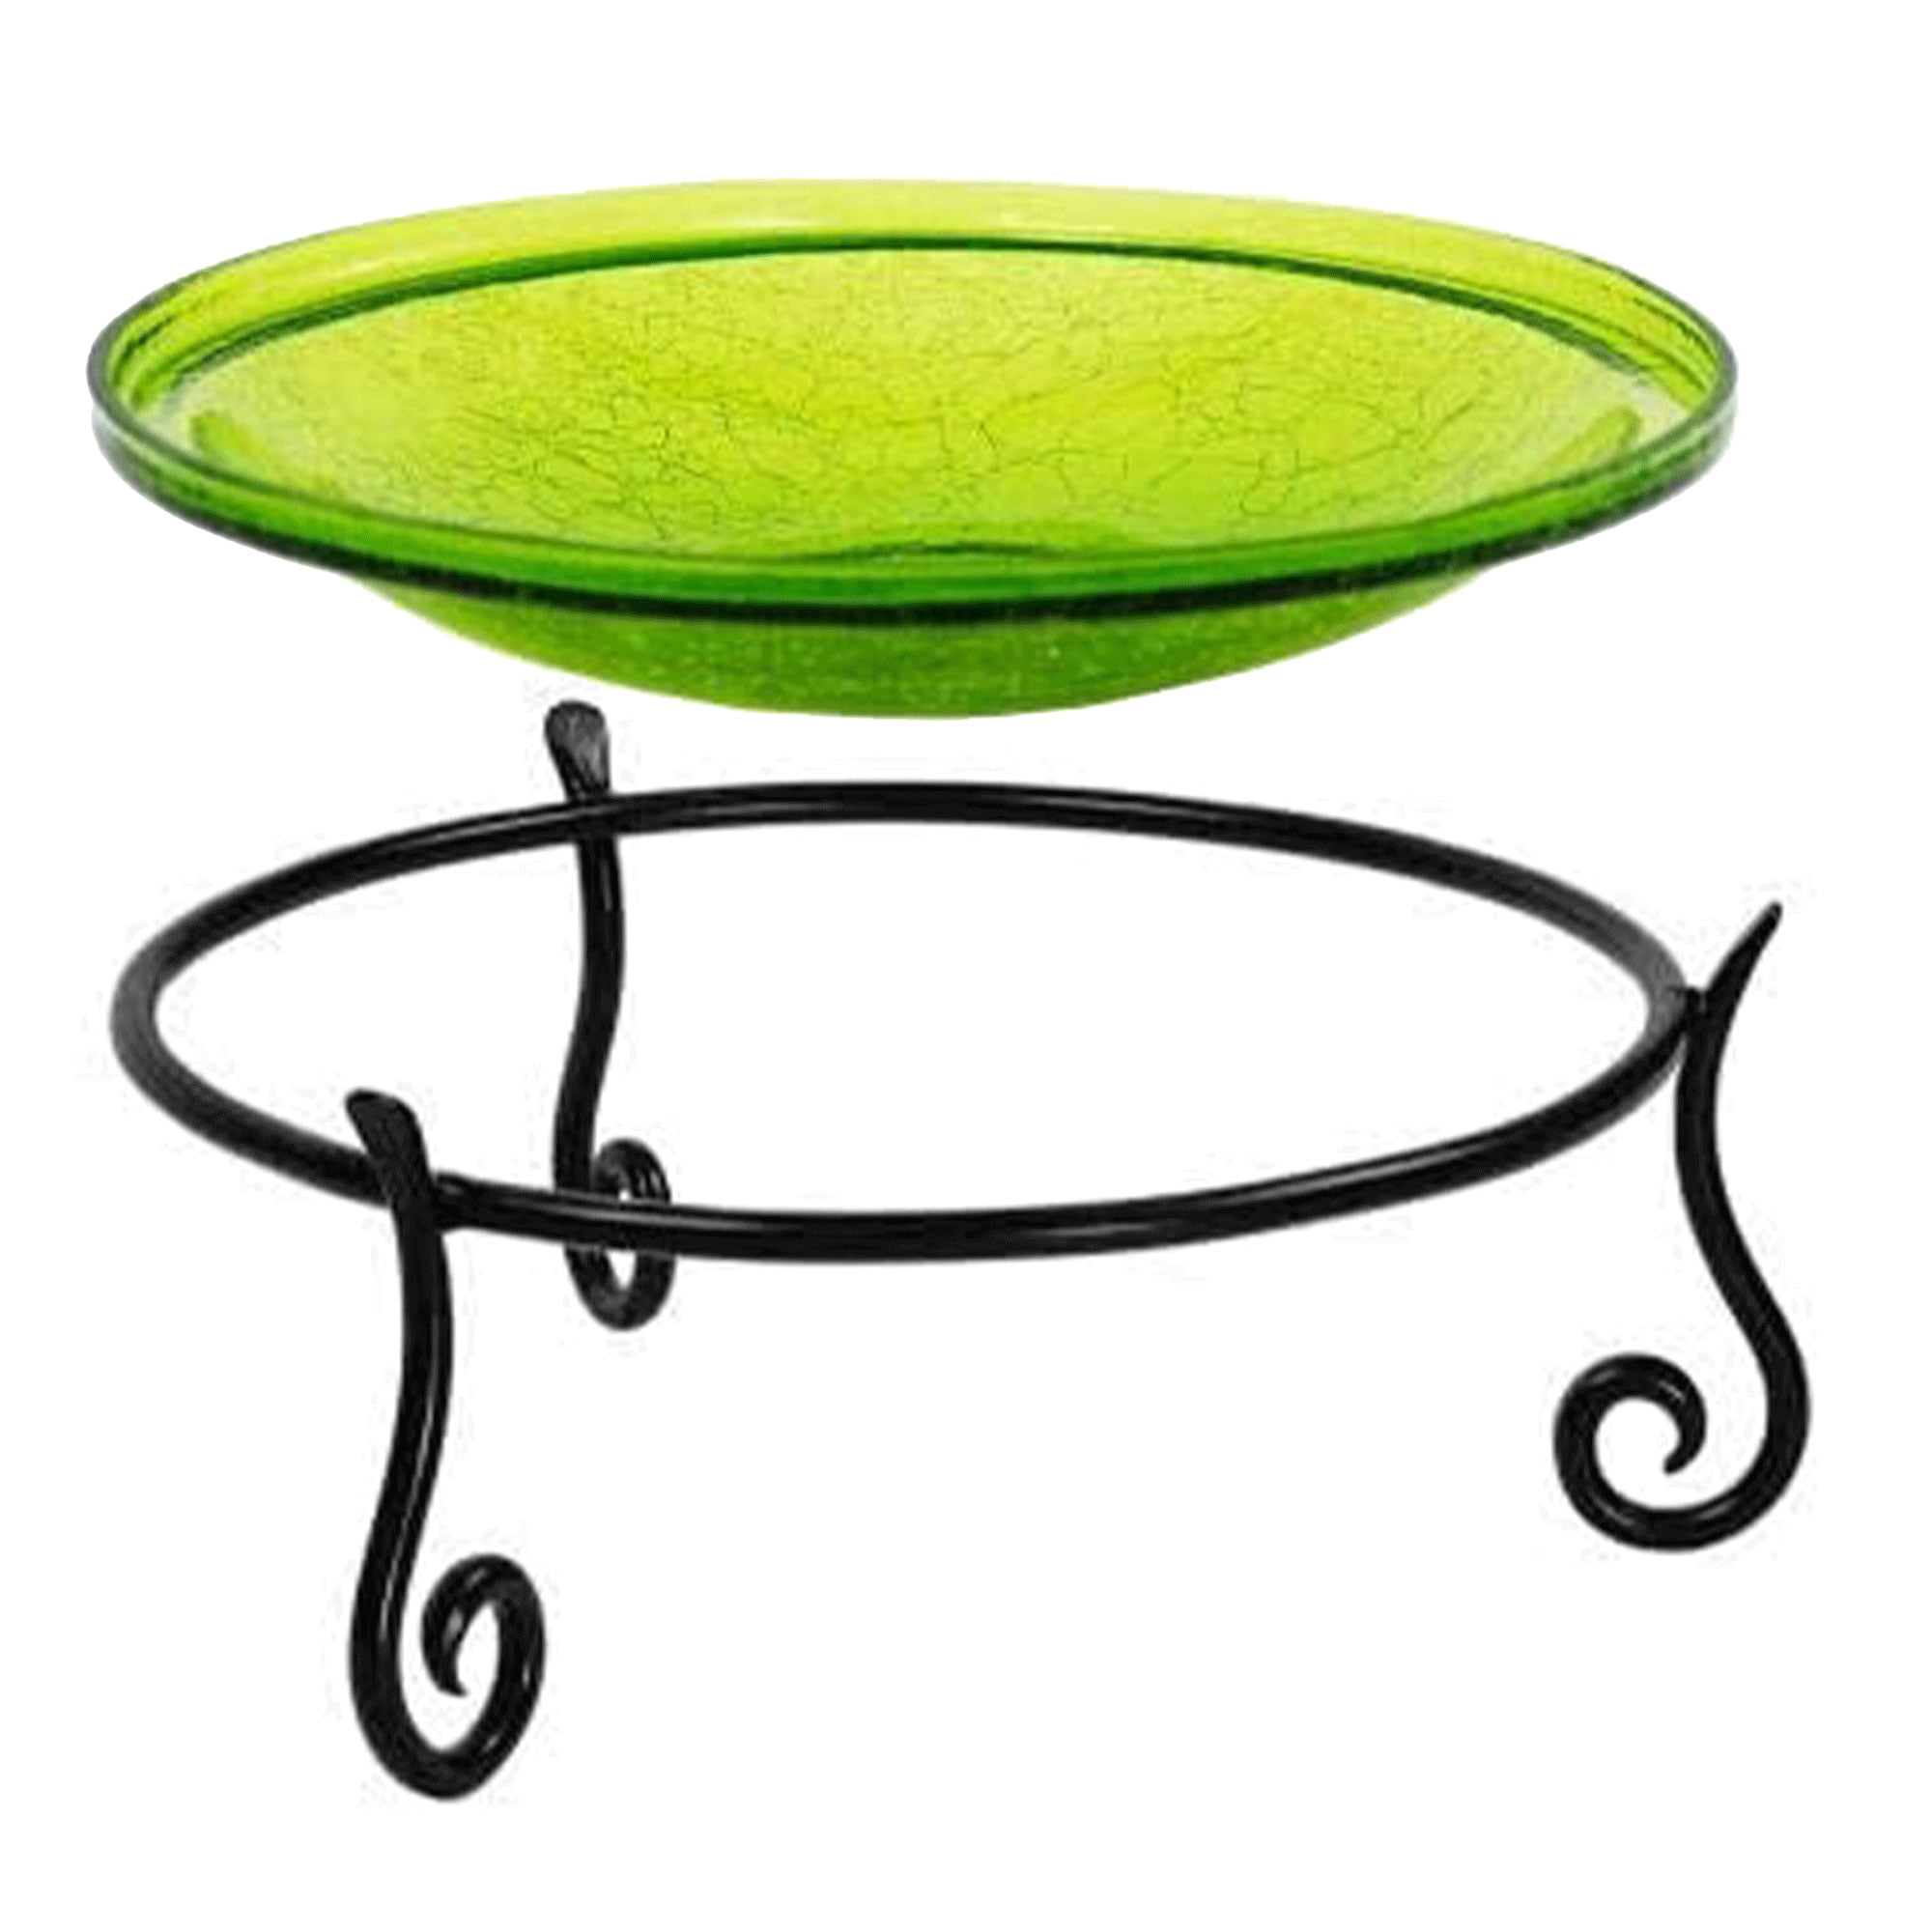 Picture of Achla CGB-14FG-S2 14 in. Fern Green Crackle Birdbath with Short Stand II